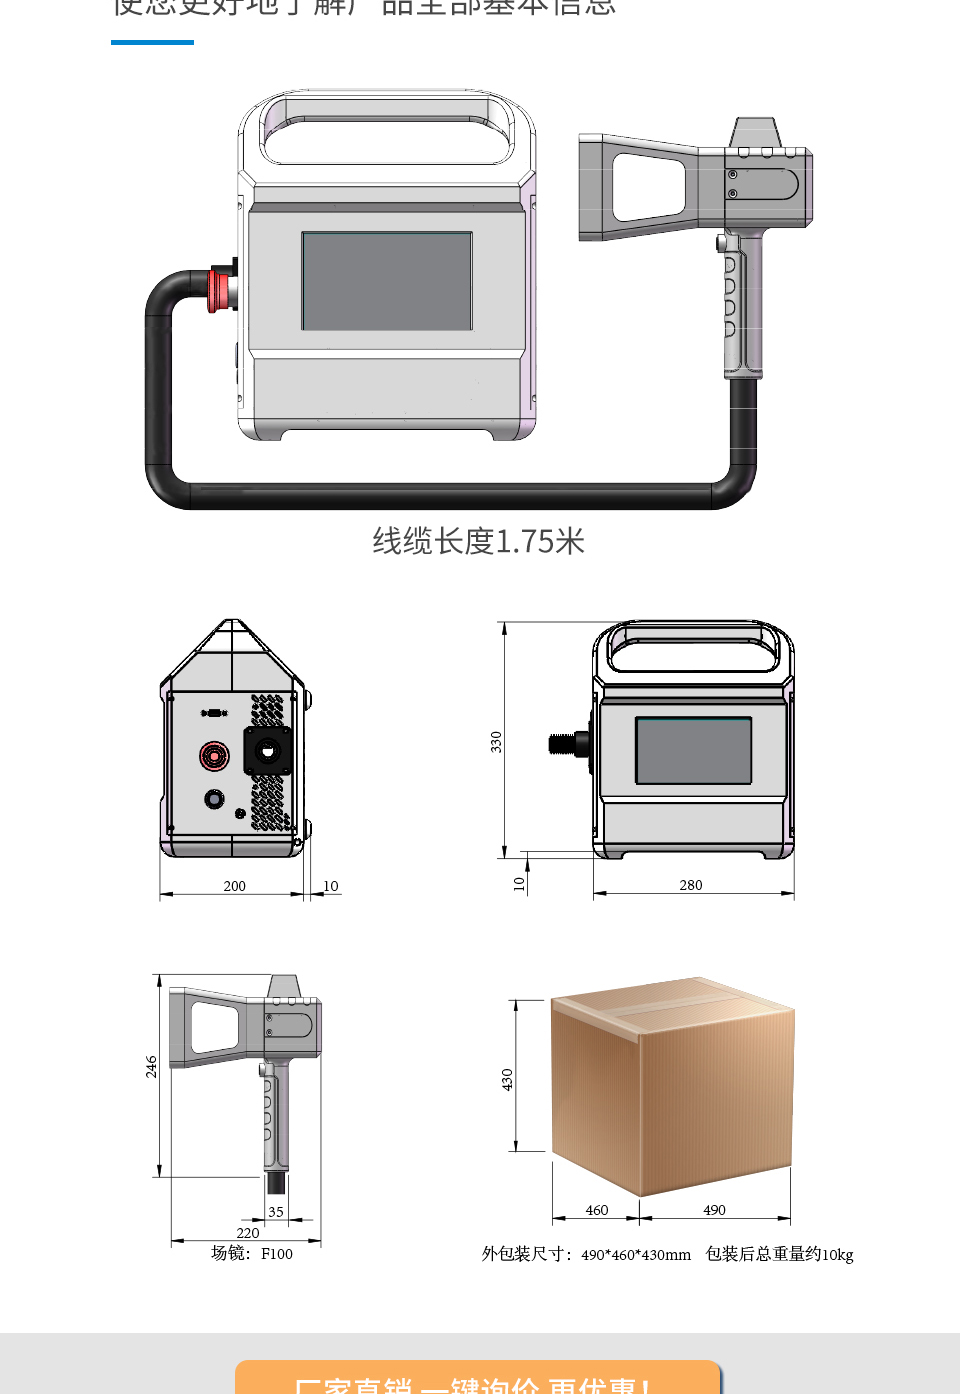 Small portable laser marking machine, laser etching machine manufacturer, portable laser engraving and lettering machine